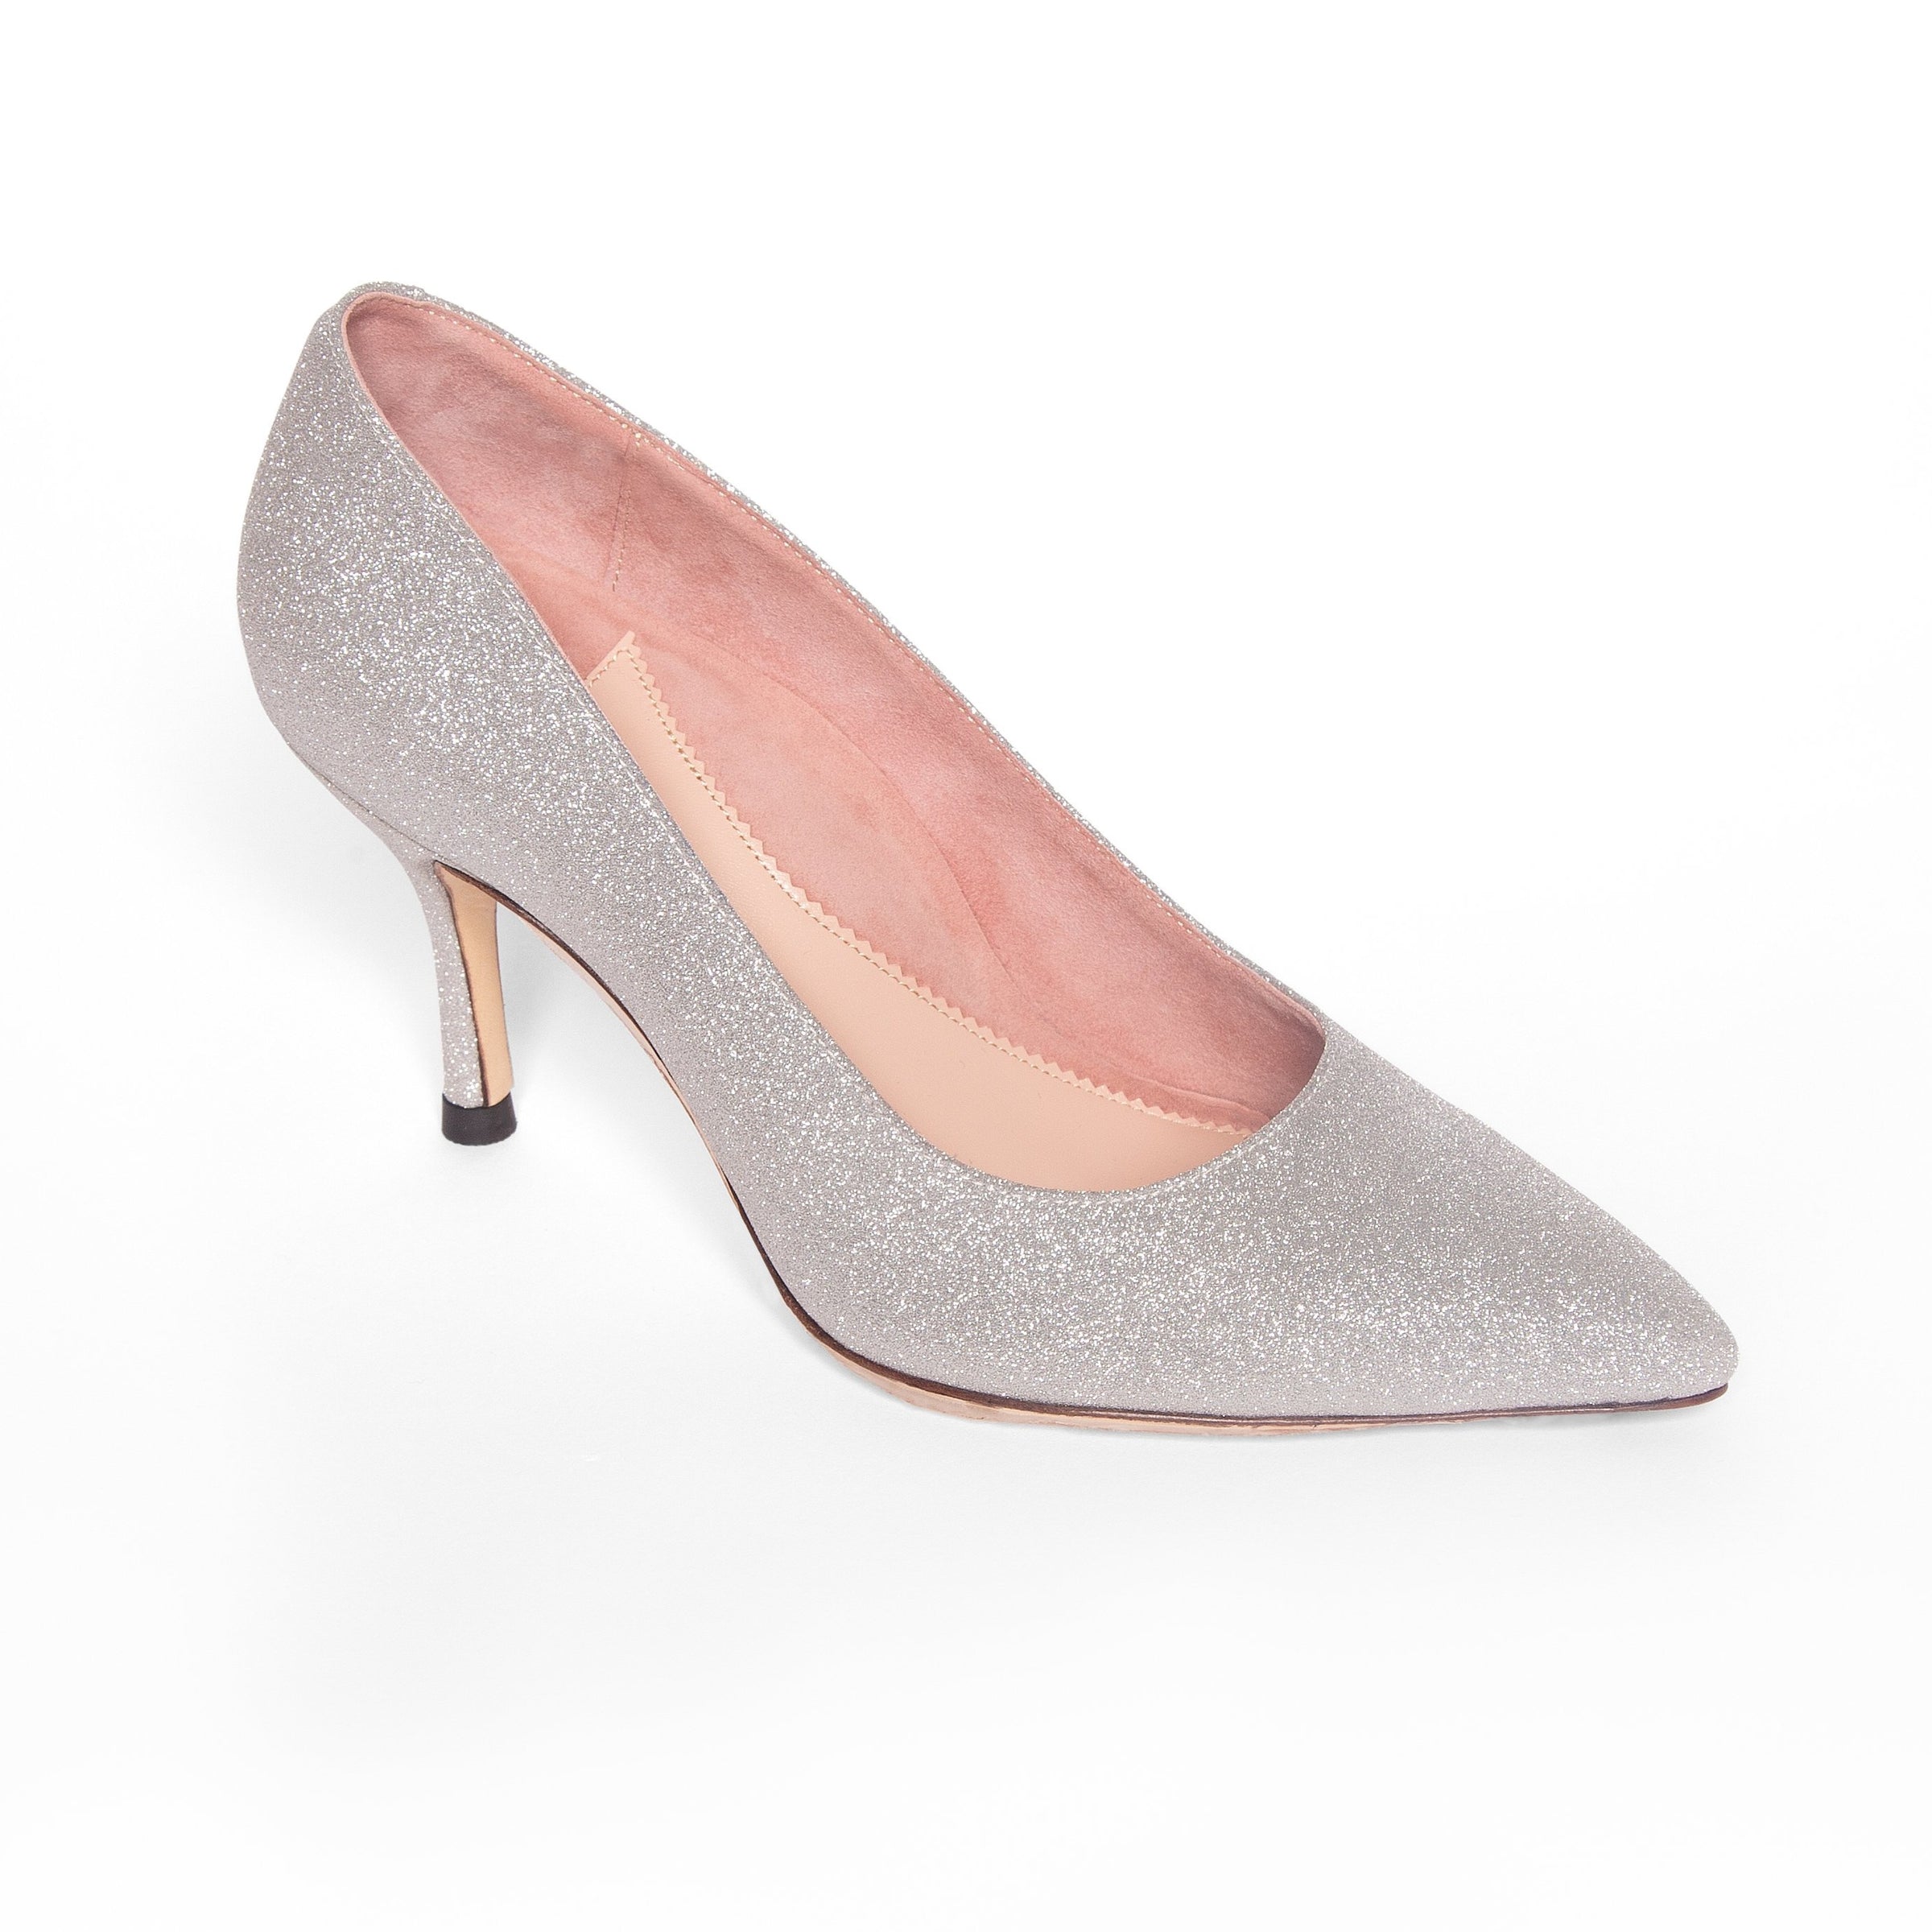 Women's Silver Mid-heel Shoes Pumps With Sequins High Heels | SHEIN USA